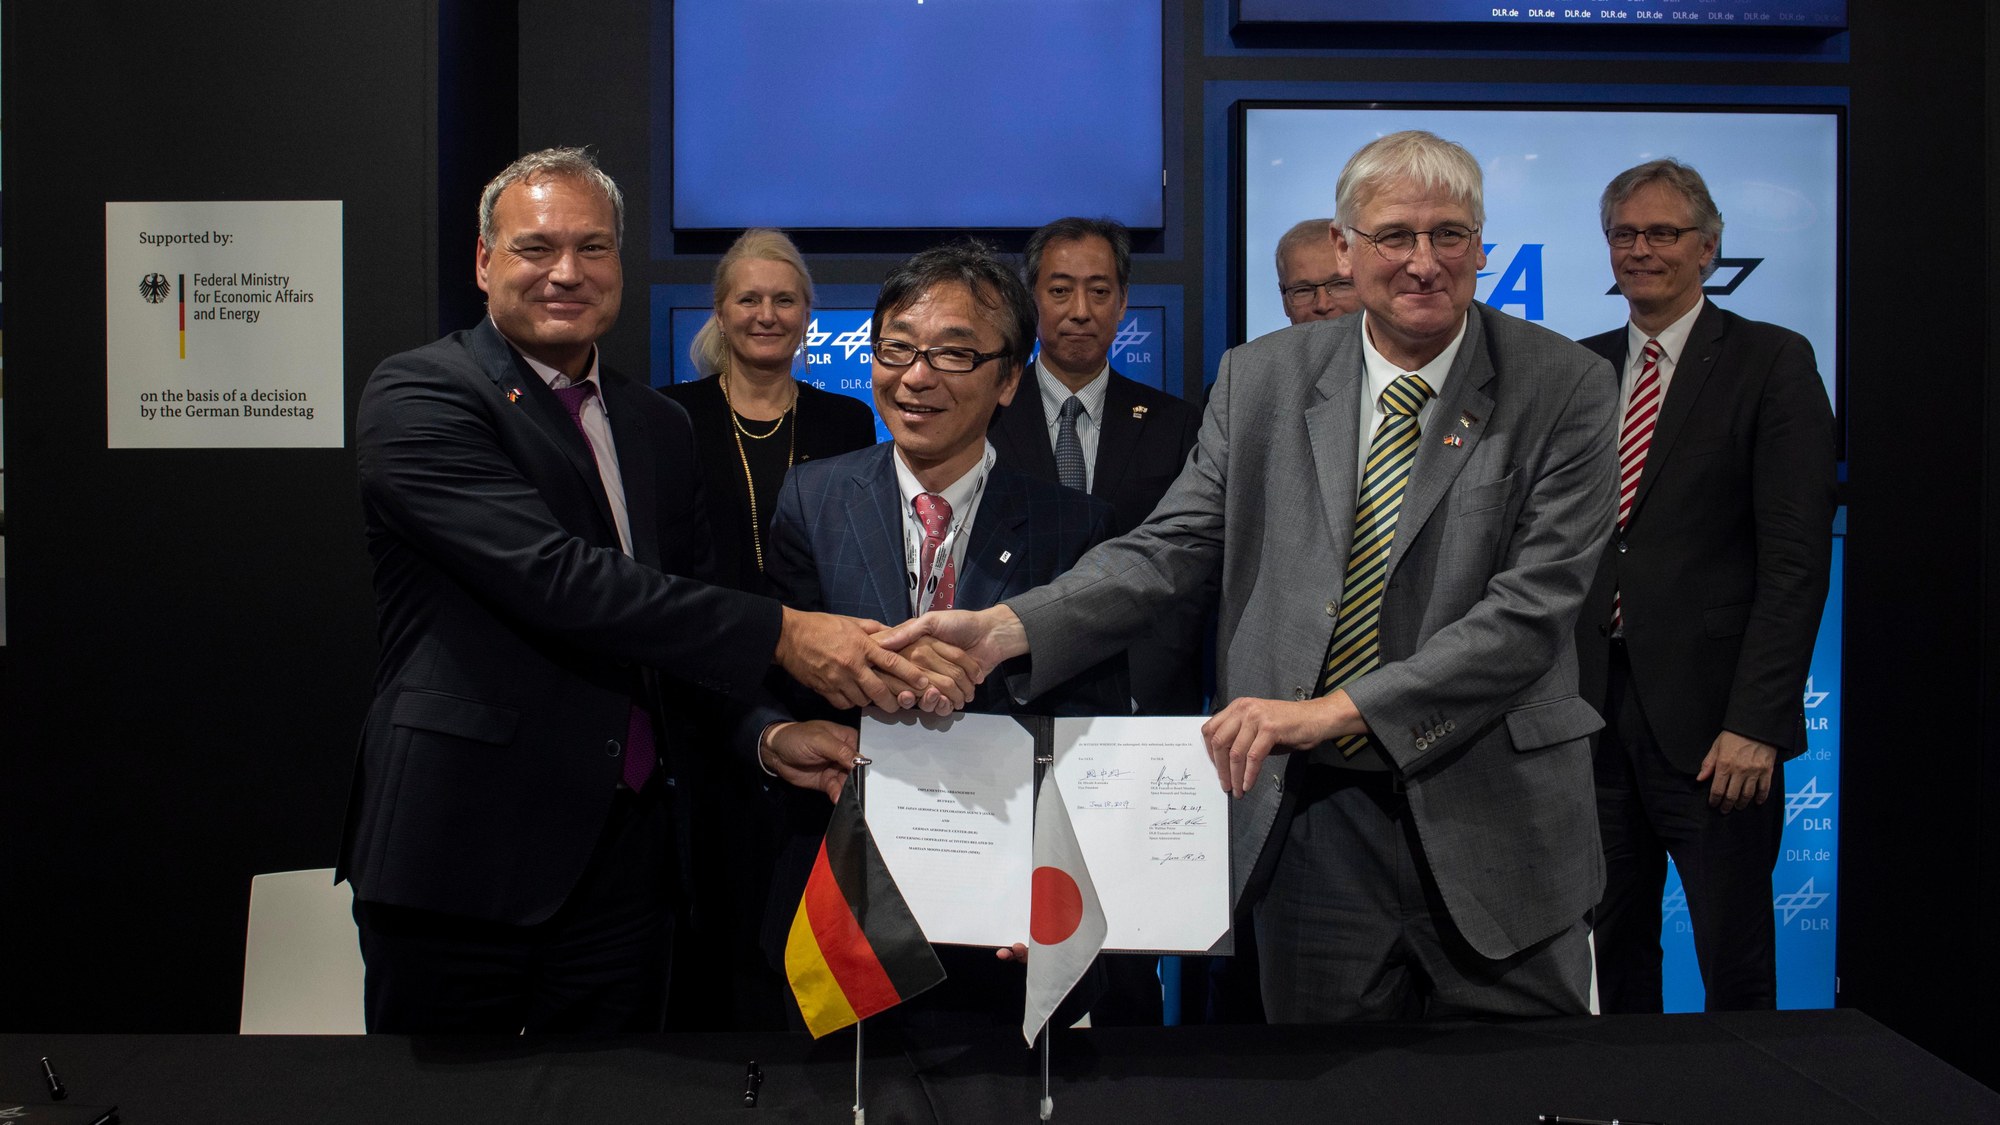 Signing of the cooperation agreement between JAXA and DLR